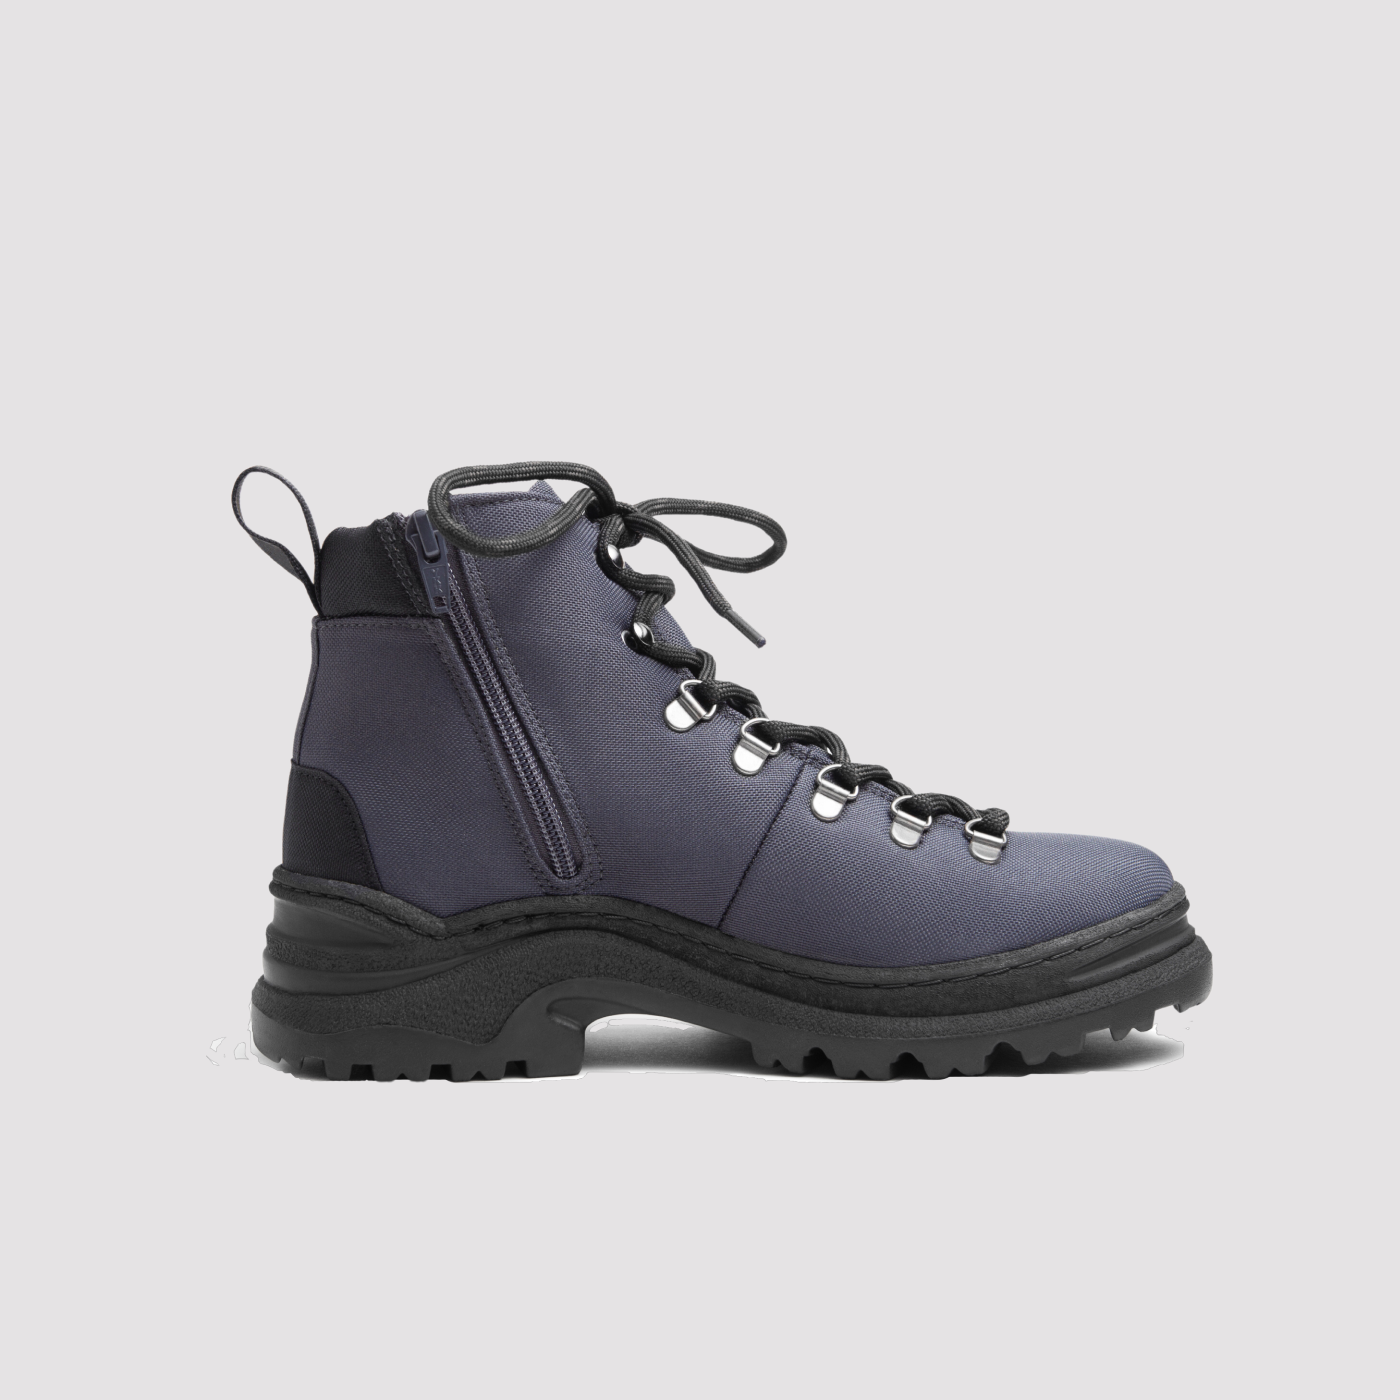 The Weekend Boot Z in Grey